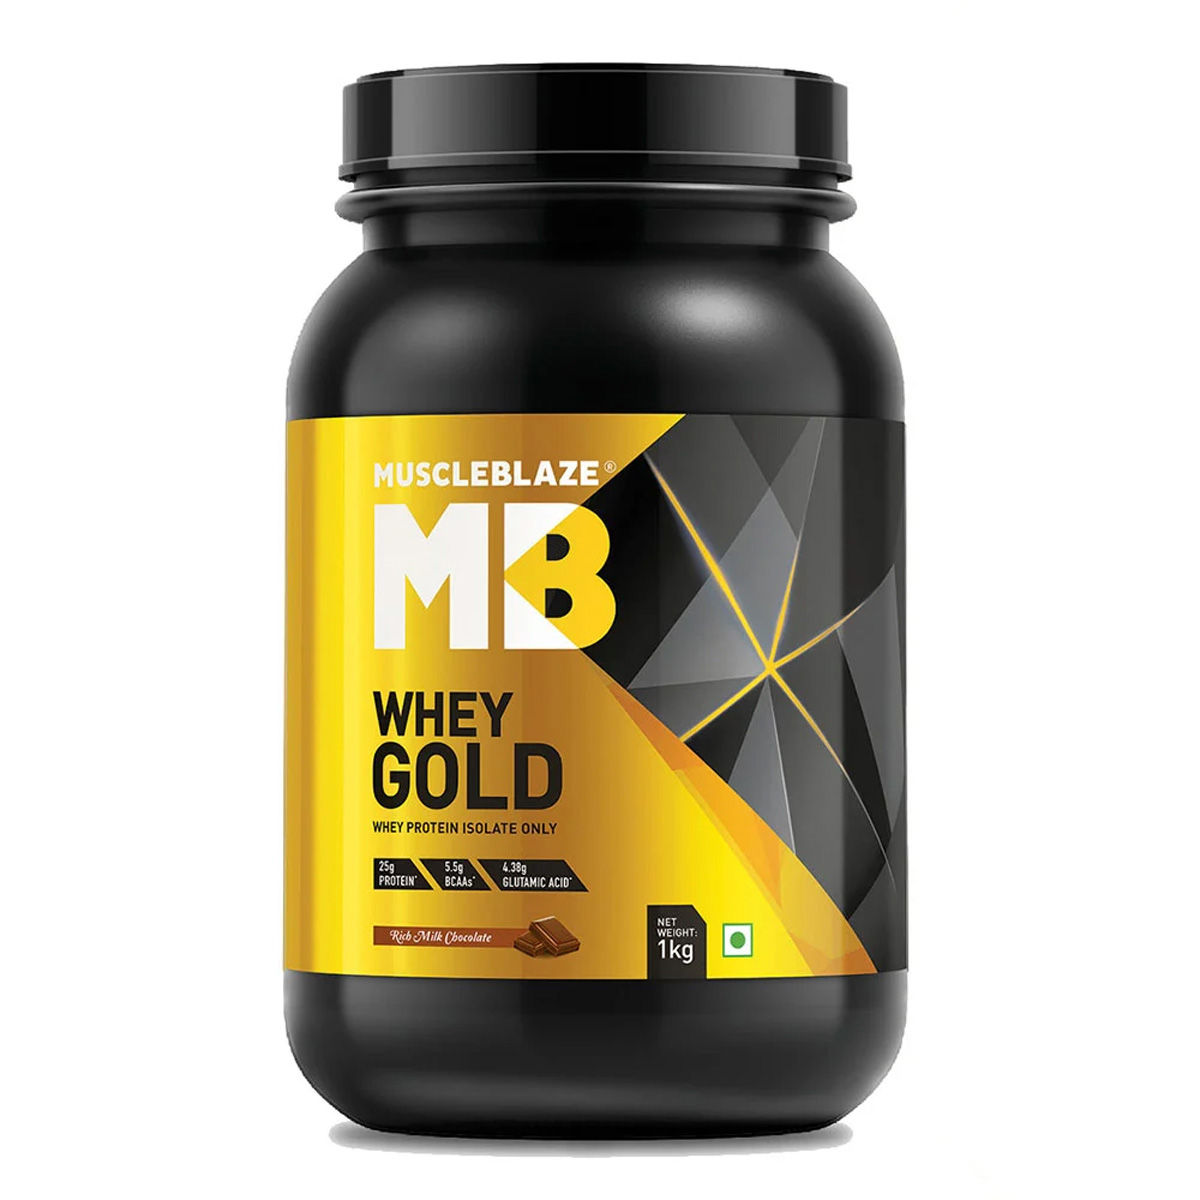 MuscleBlaze Whey Gold Rich Milk Chocolate Flavour Powder, 1 kg, Pack of 1 